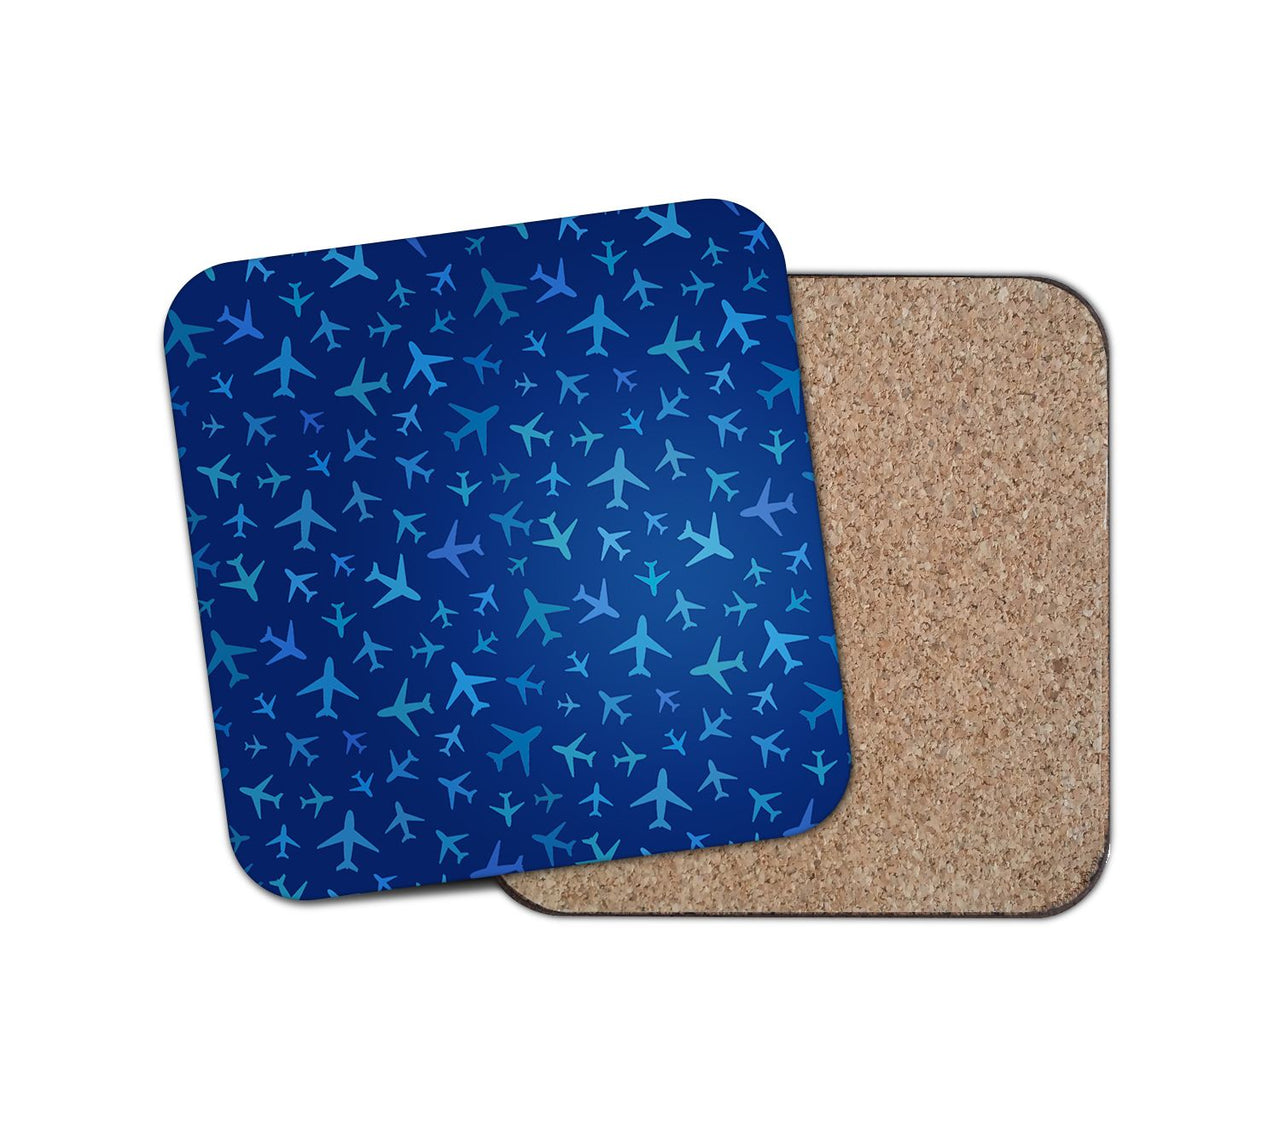 Many Airplanes Blue Designed Coasters